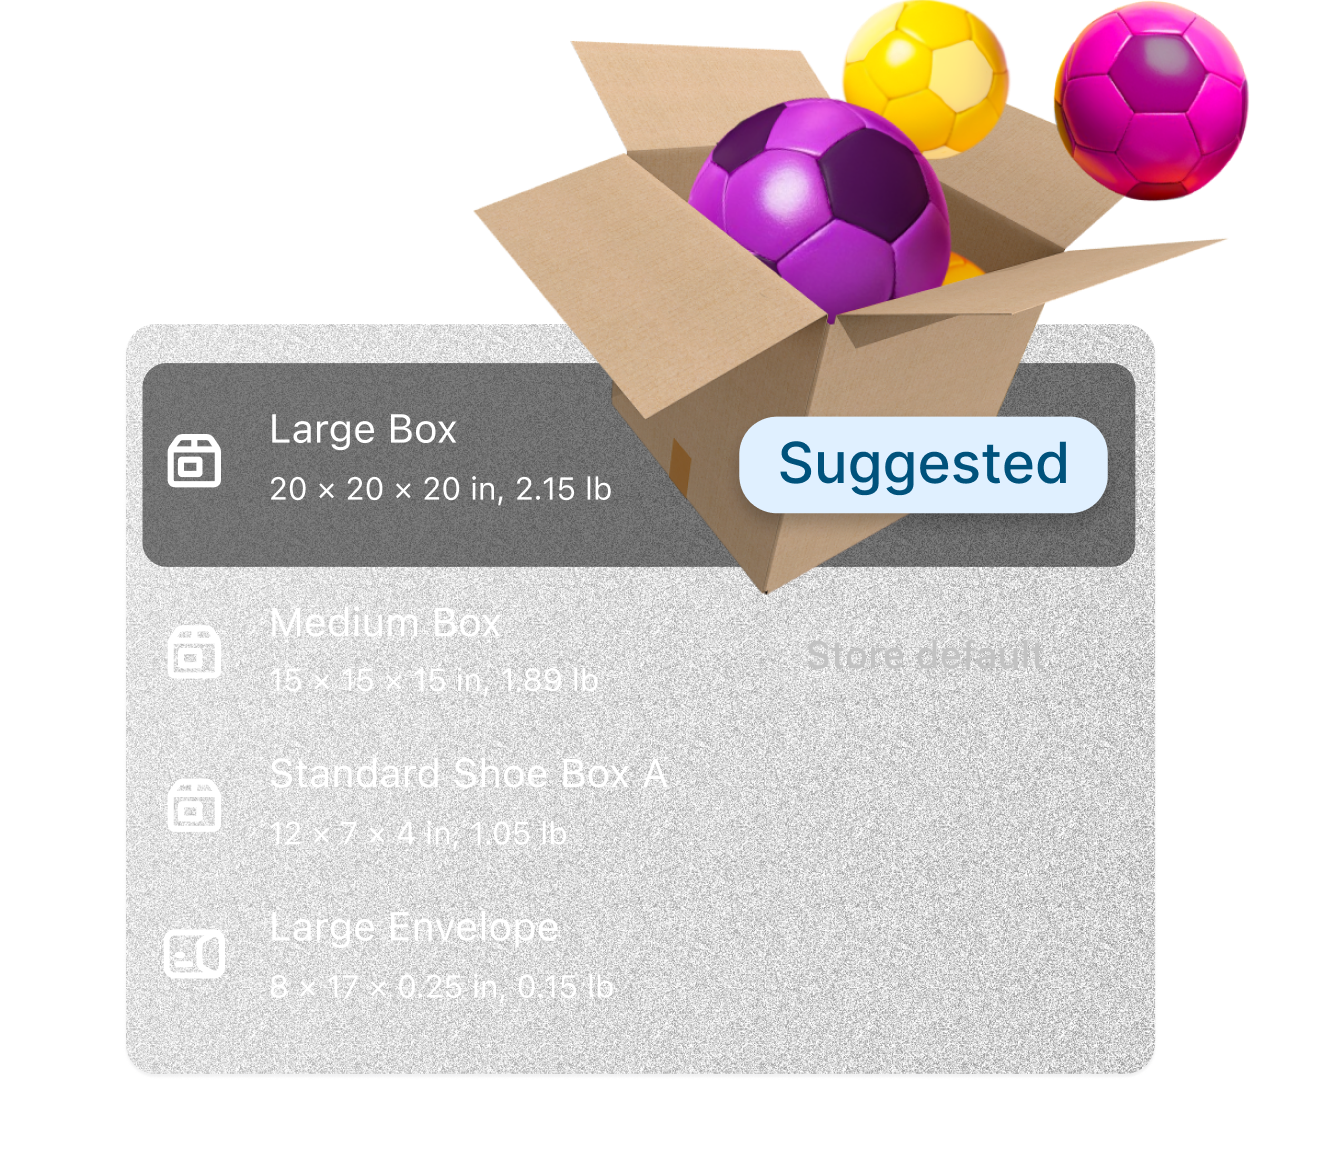 Four package sizes are listed. Shopify Shipping suggests using a large box to fulfill an order of soccer balls, instead of the store's default medium box.